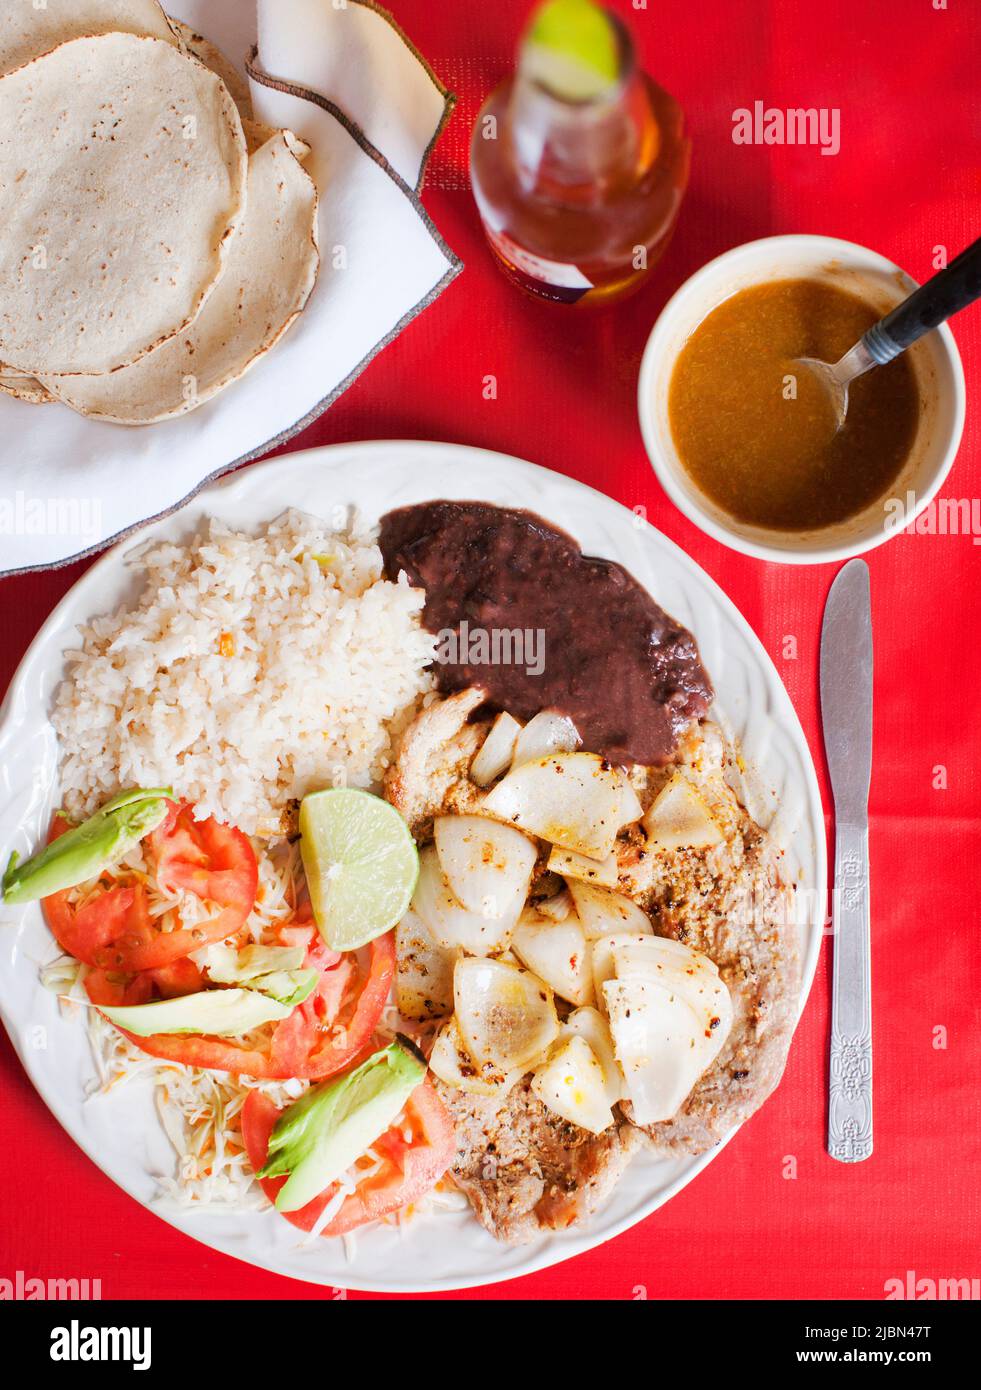 Poc Choc, a signature pork dish with onions, is the best-selling dish at Loncheria El Poc-Choc in downtown Isla Mujeres, Quintana Roo, Mexico. Stock Photo